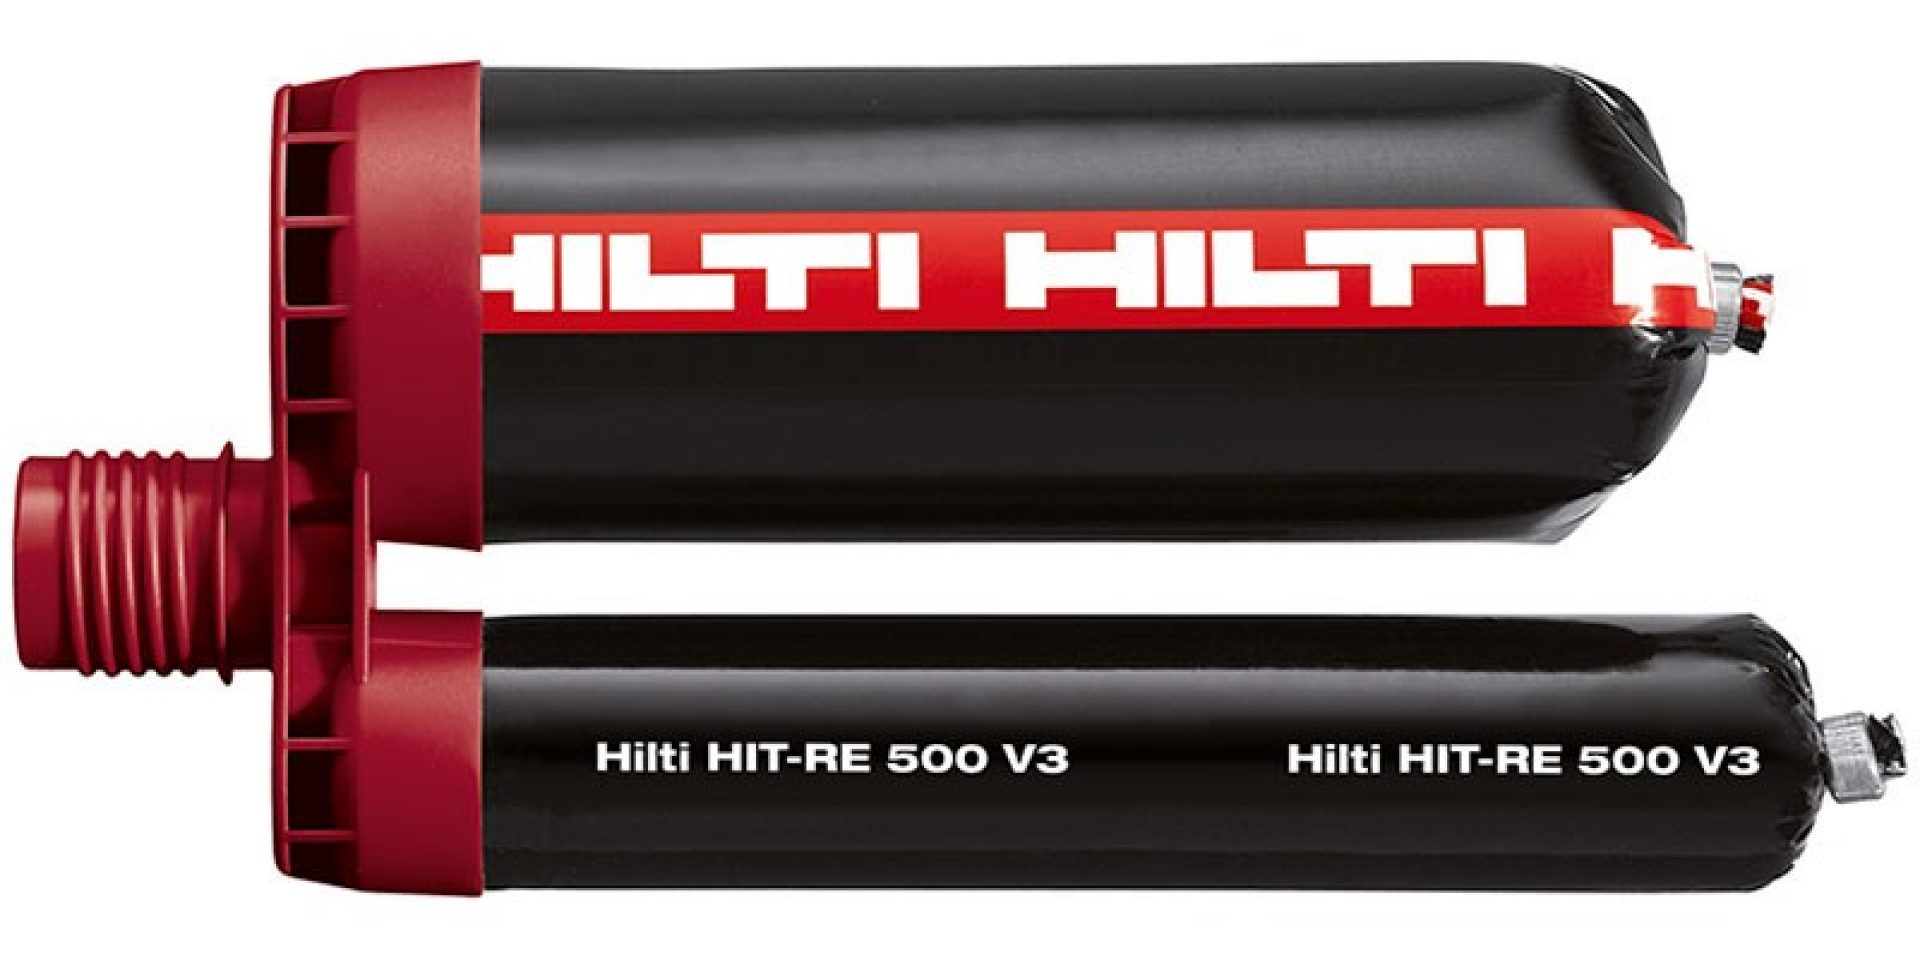 HIT-RE 500 V3 ultimate-performance epoxy mortar as part of the Hilti SafeSet system